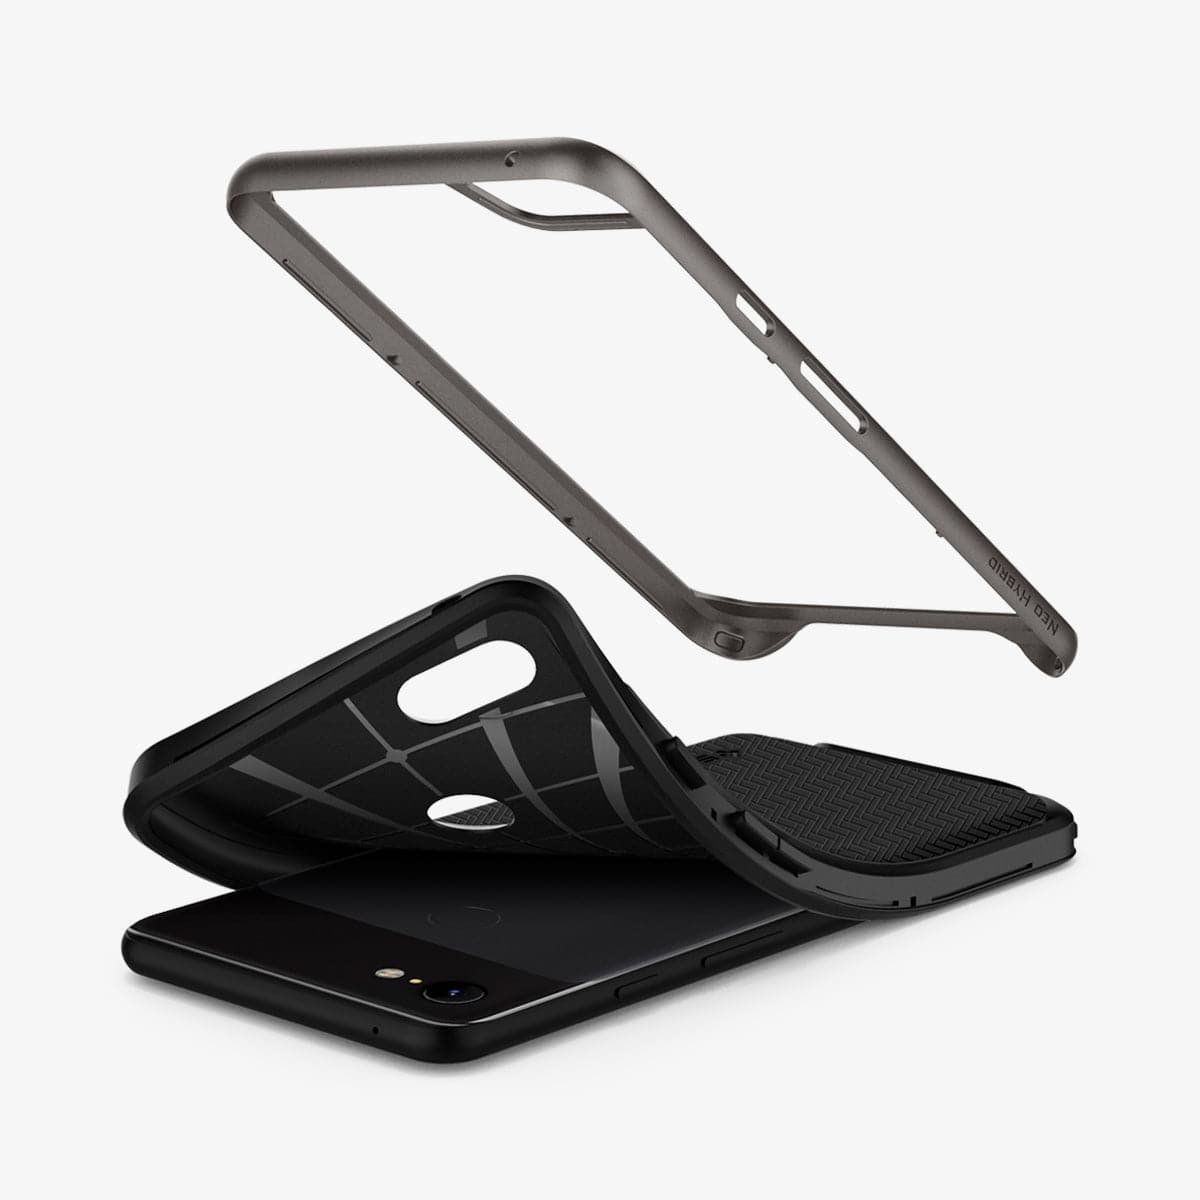 F19CS25036 - Pixel 3 Series Case Neo Hybrid in gunmetal showing the case bending away from device and hard pc hovering above